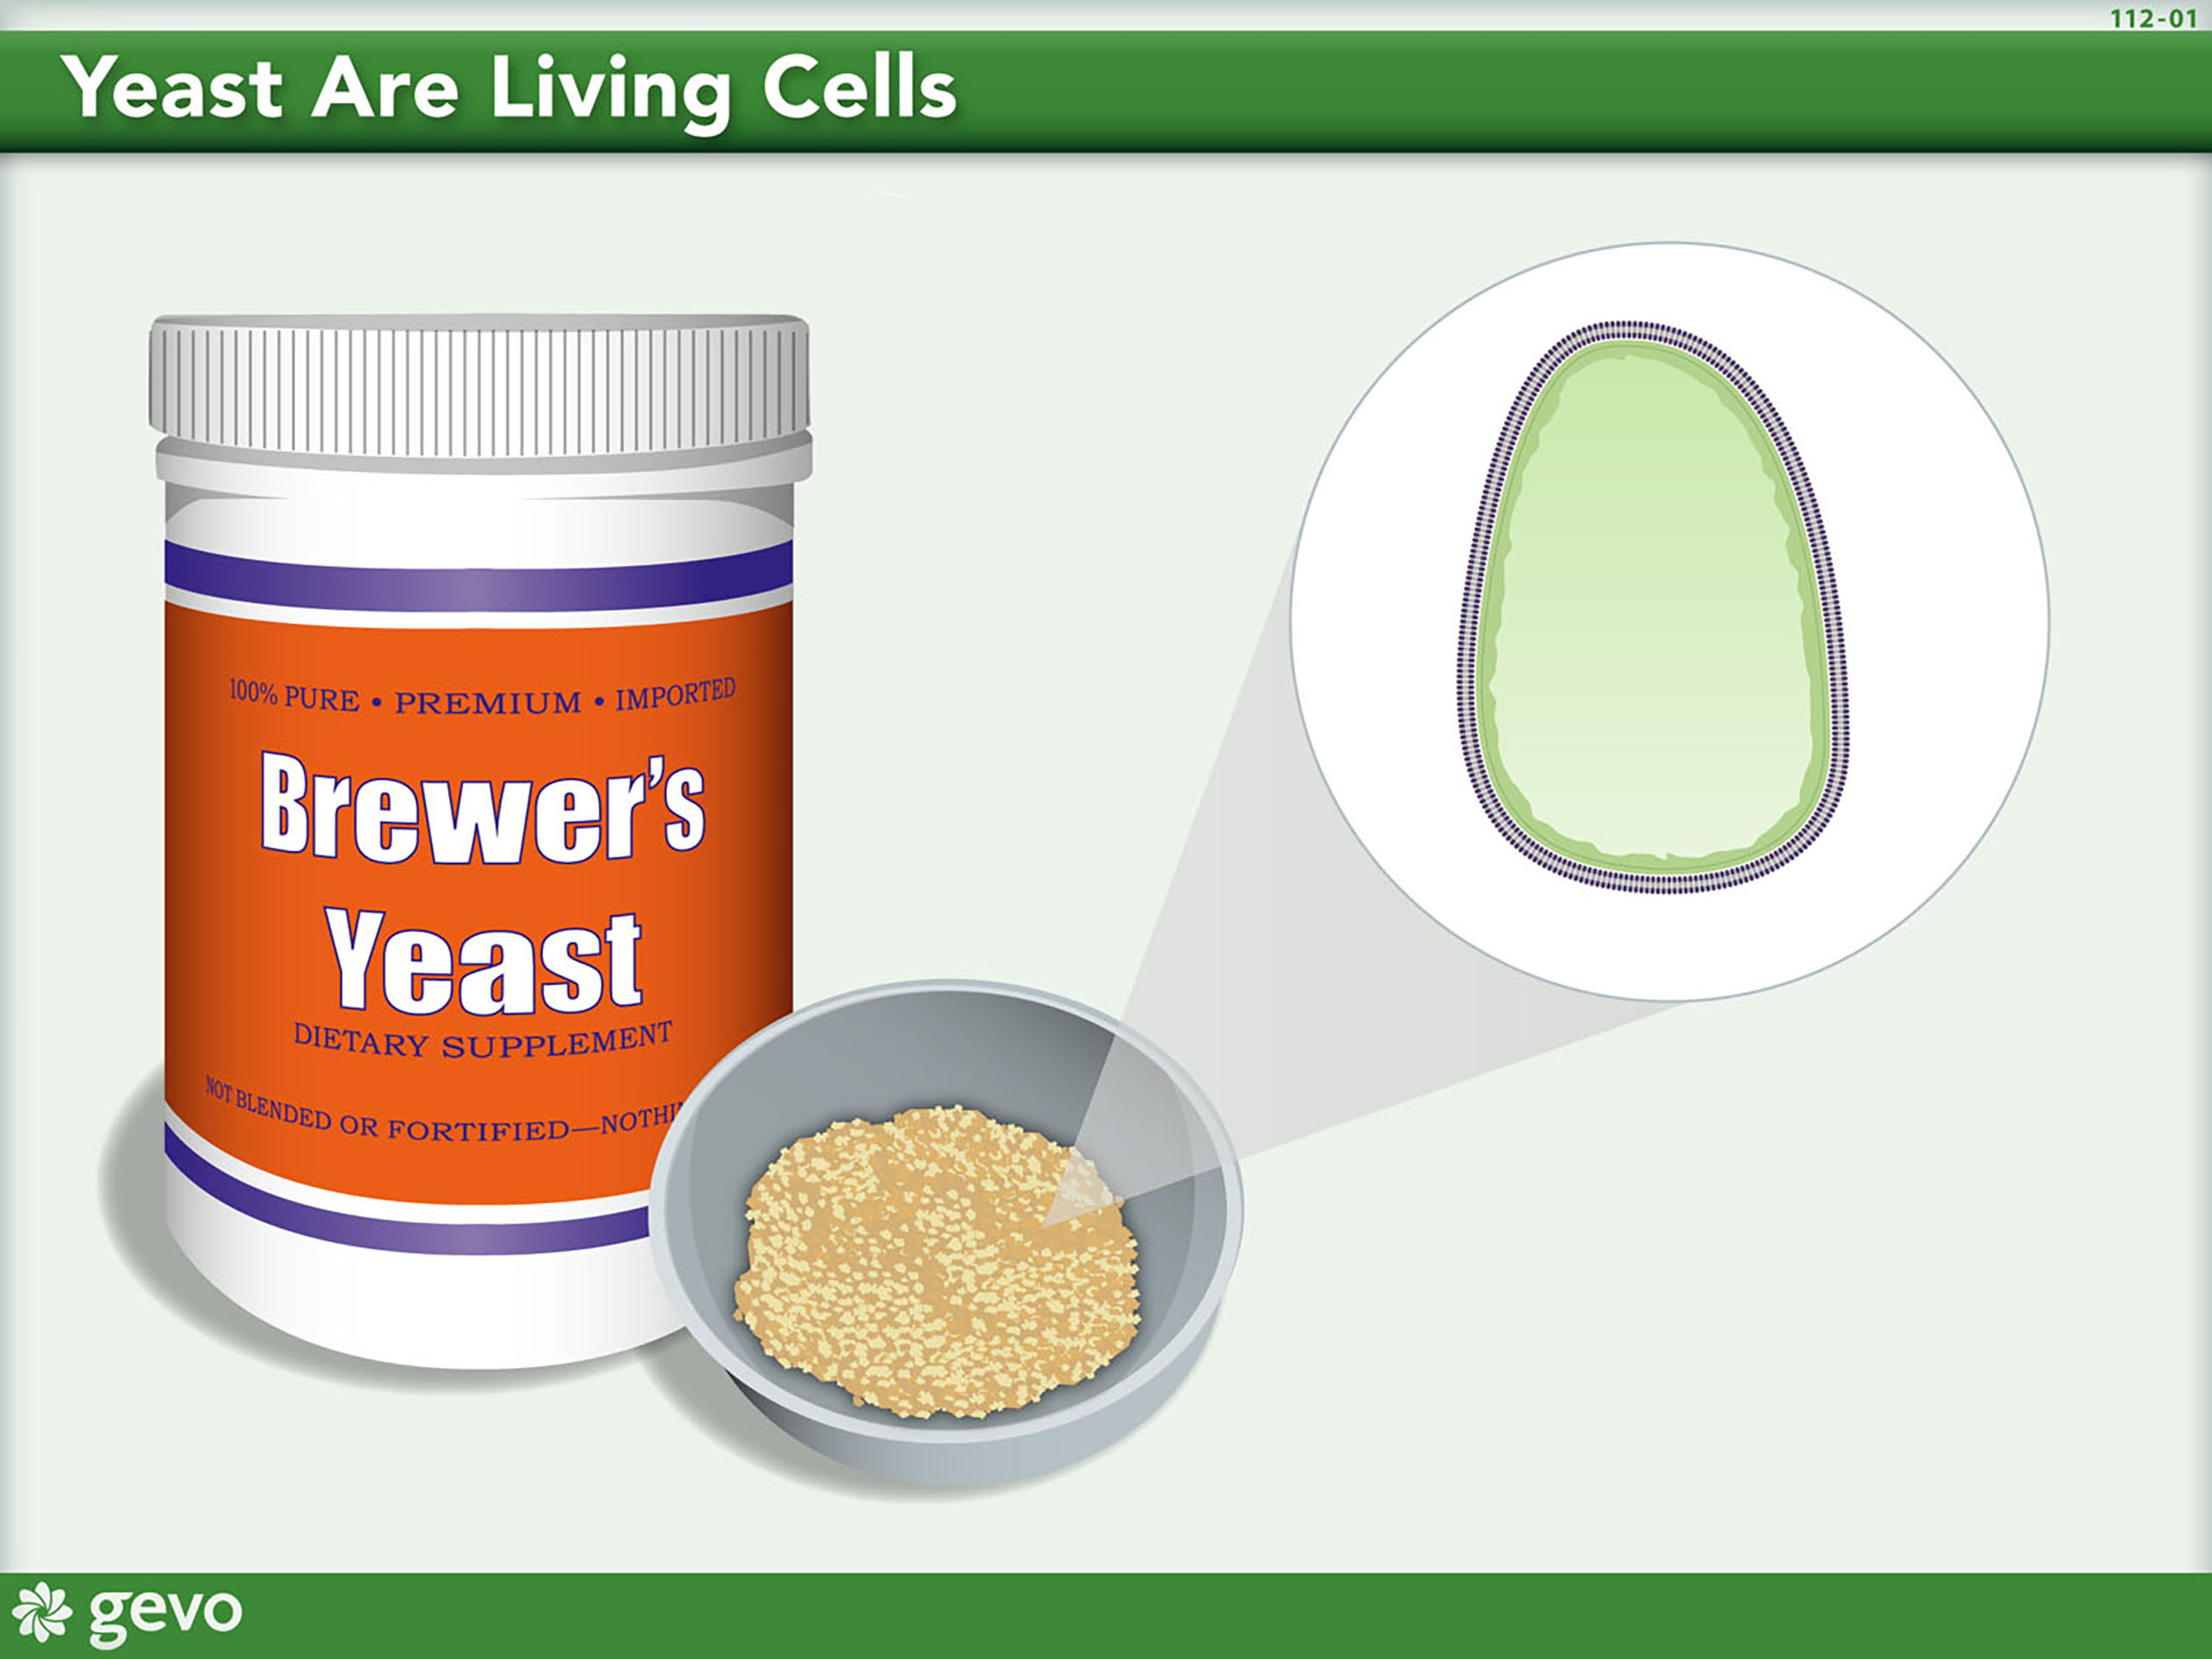 illustration depicting a container of Brewer's Yeast with an enlarged image of yeast explaining Yeast Are Living Cells.